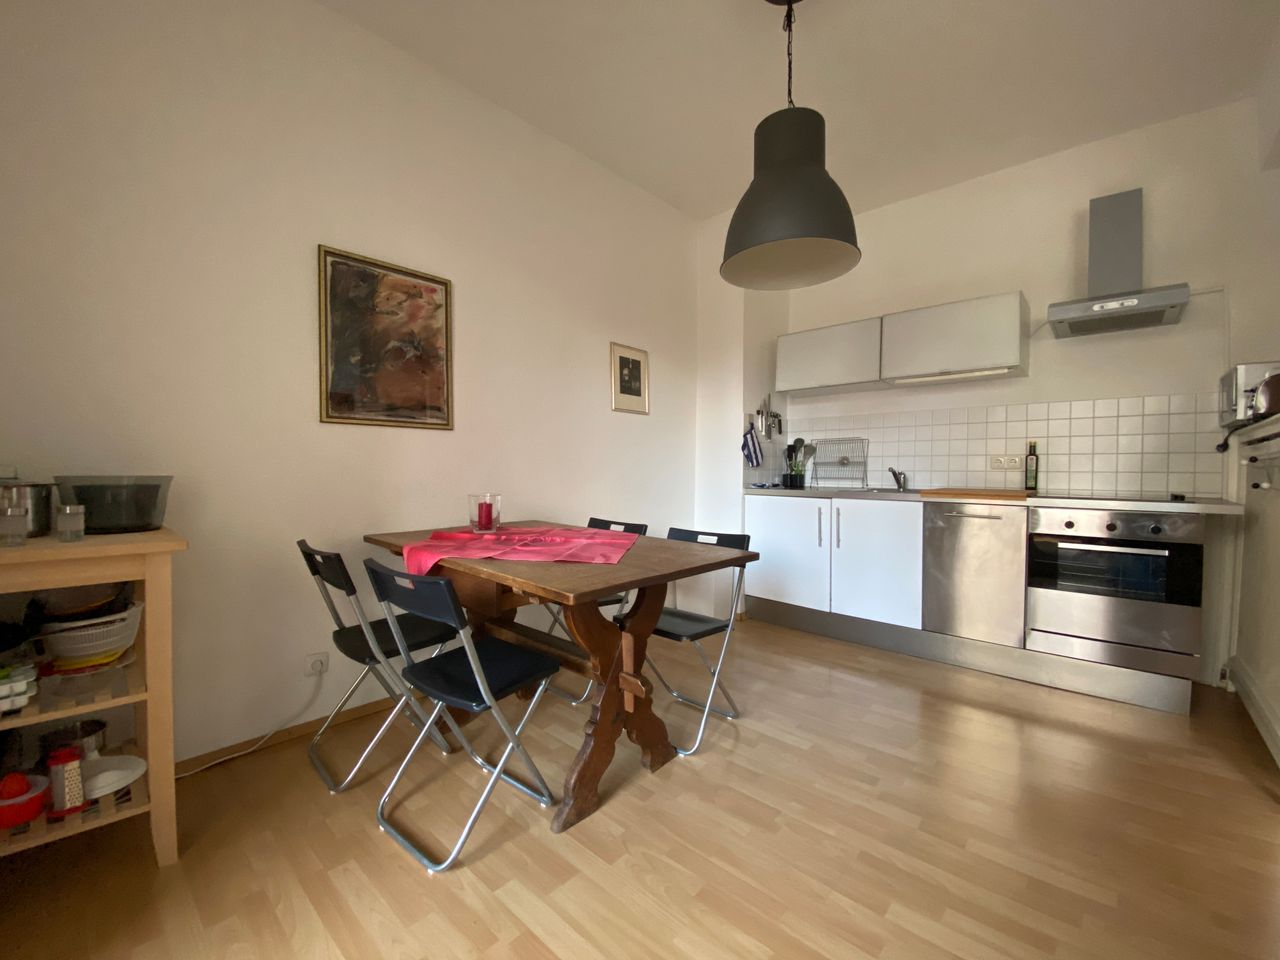 Cozy, awesome apartment located in Köln with large balcony